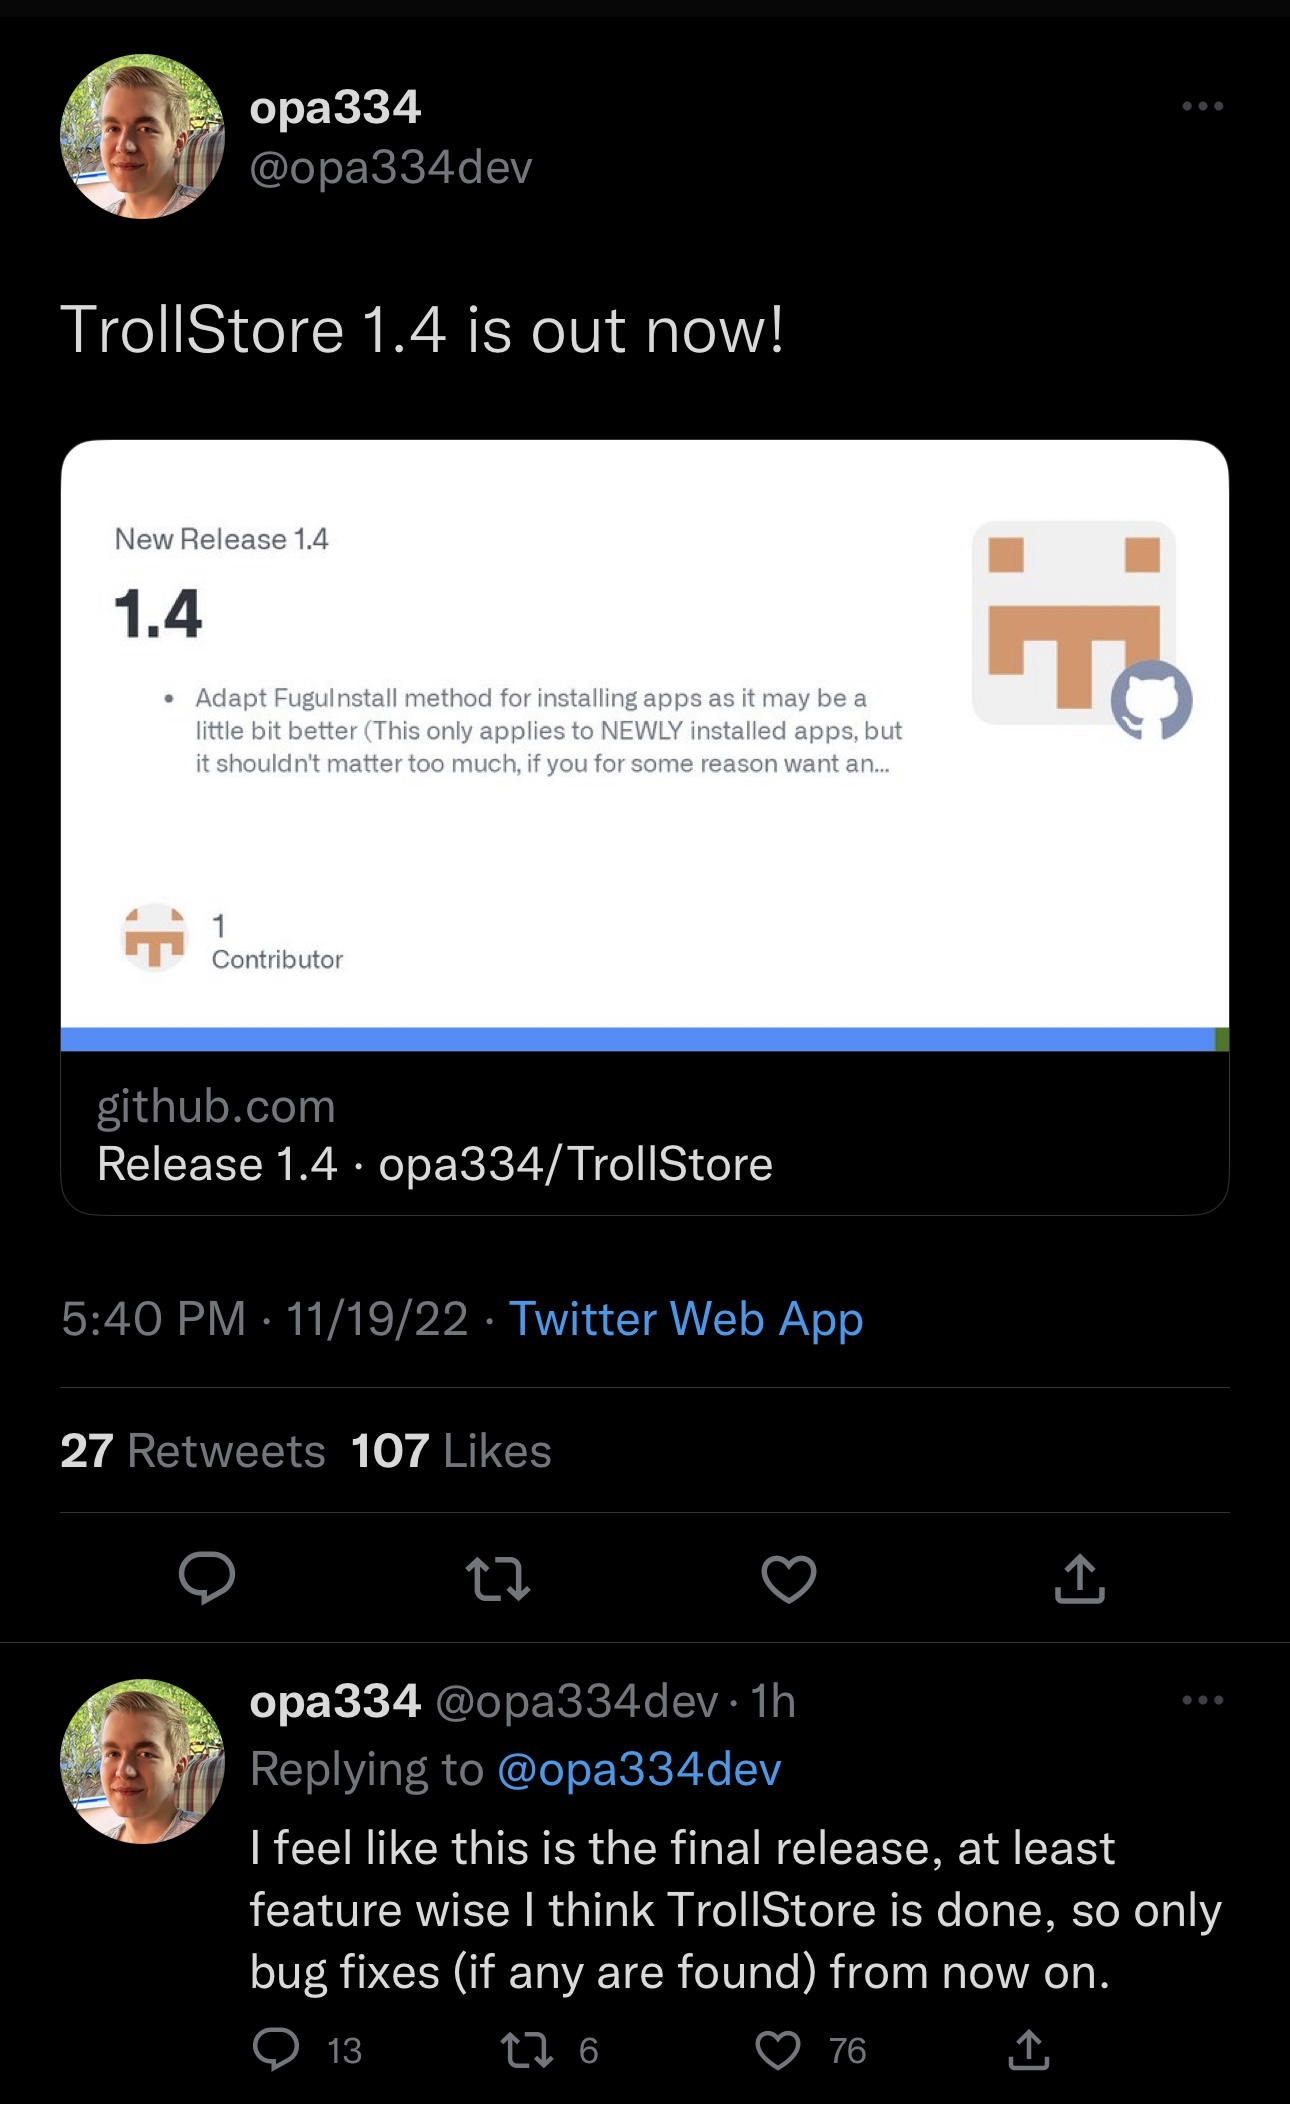 TrollStore updated to version 1.4 and announced via Twitter.